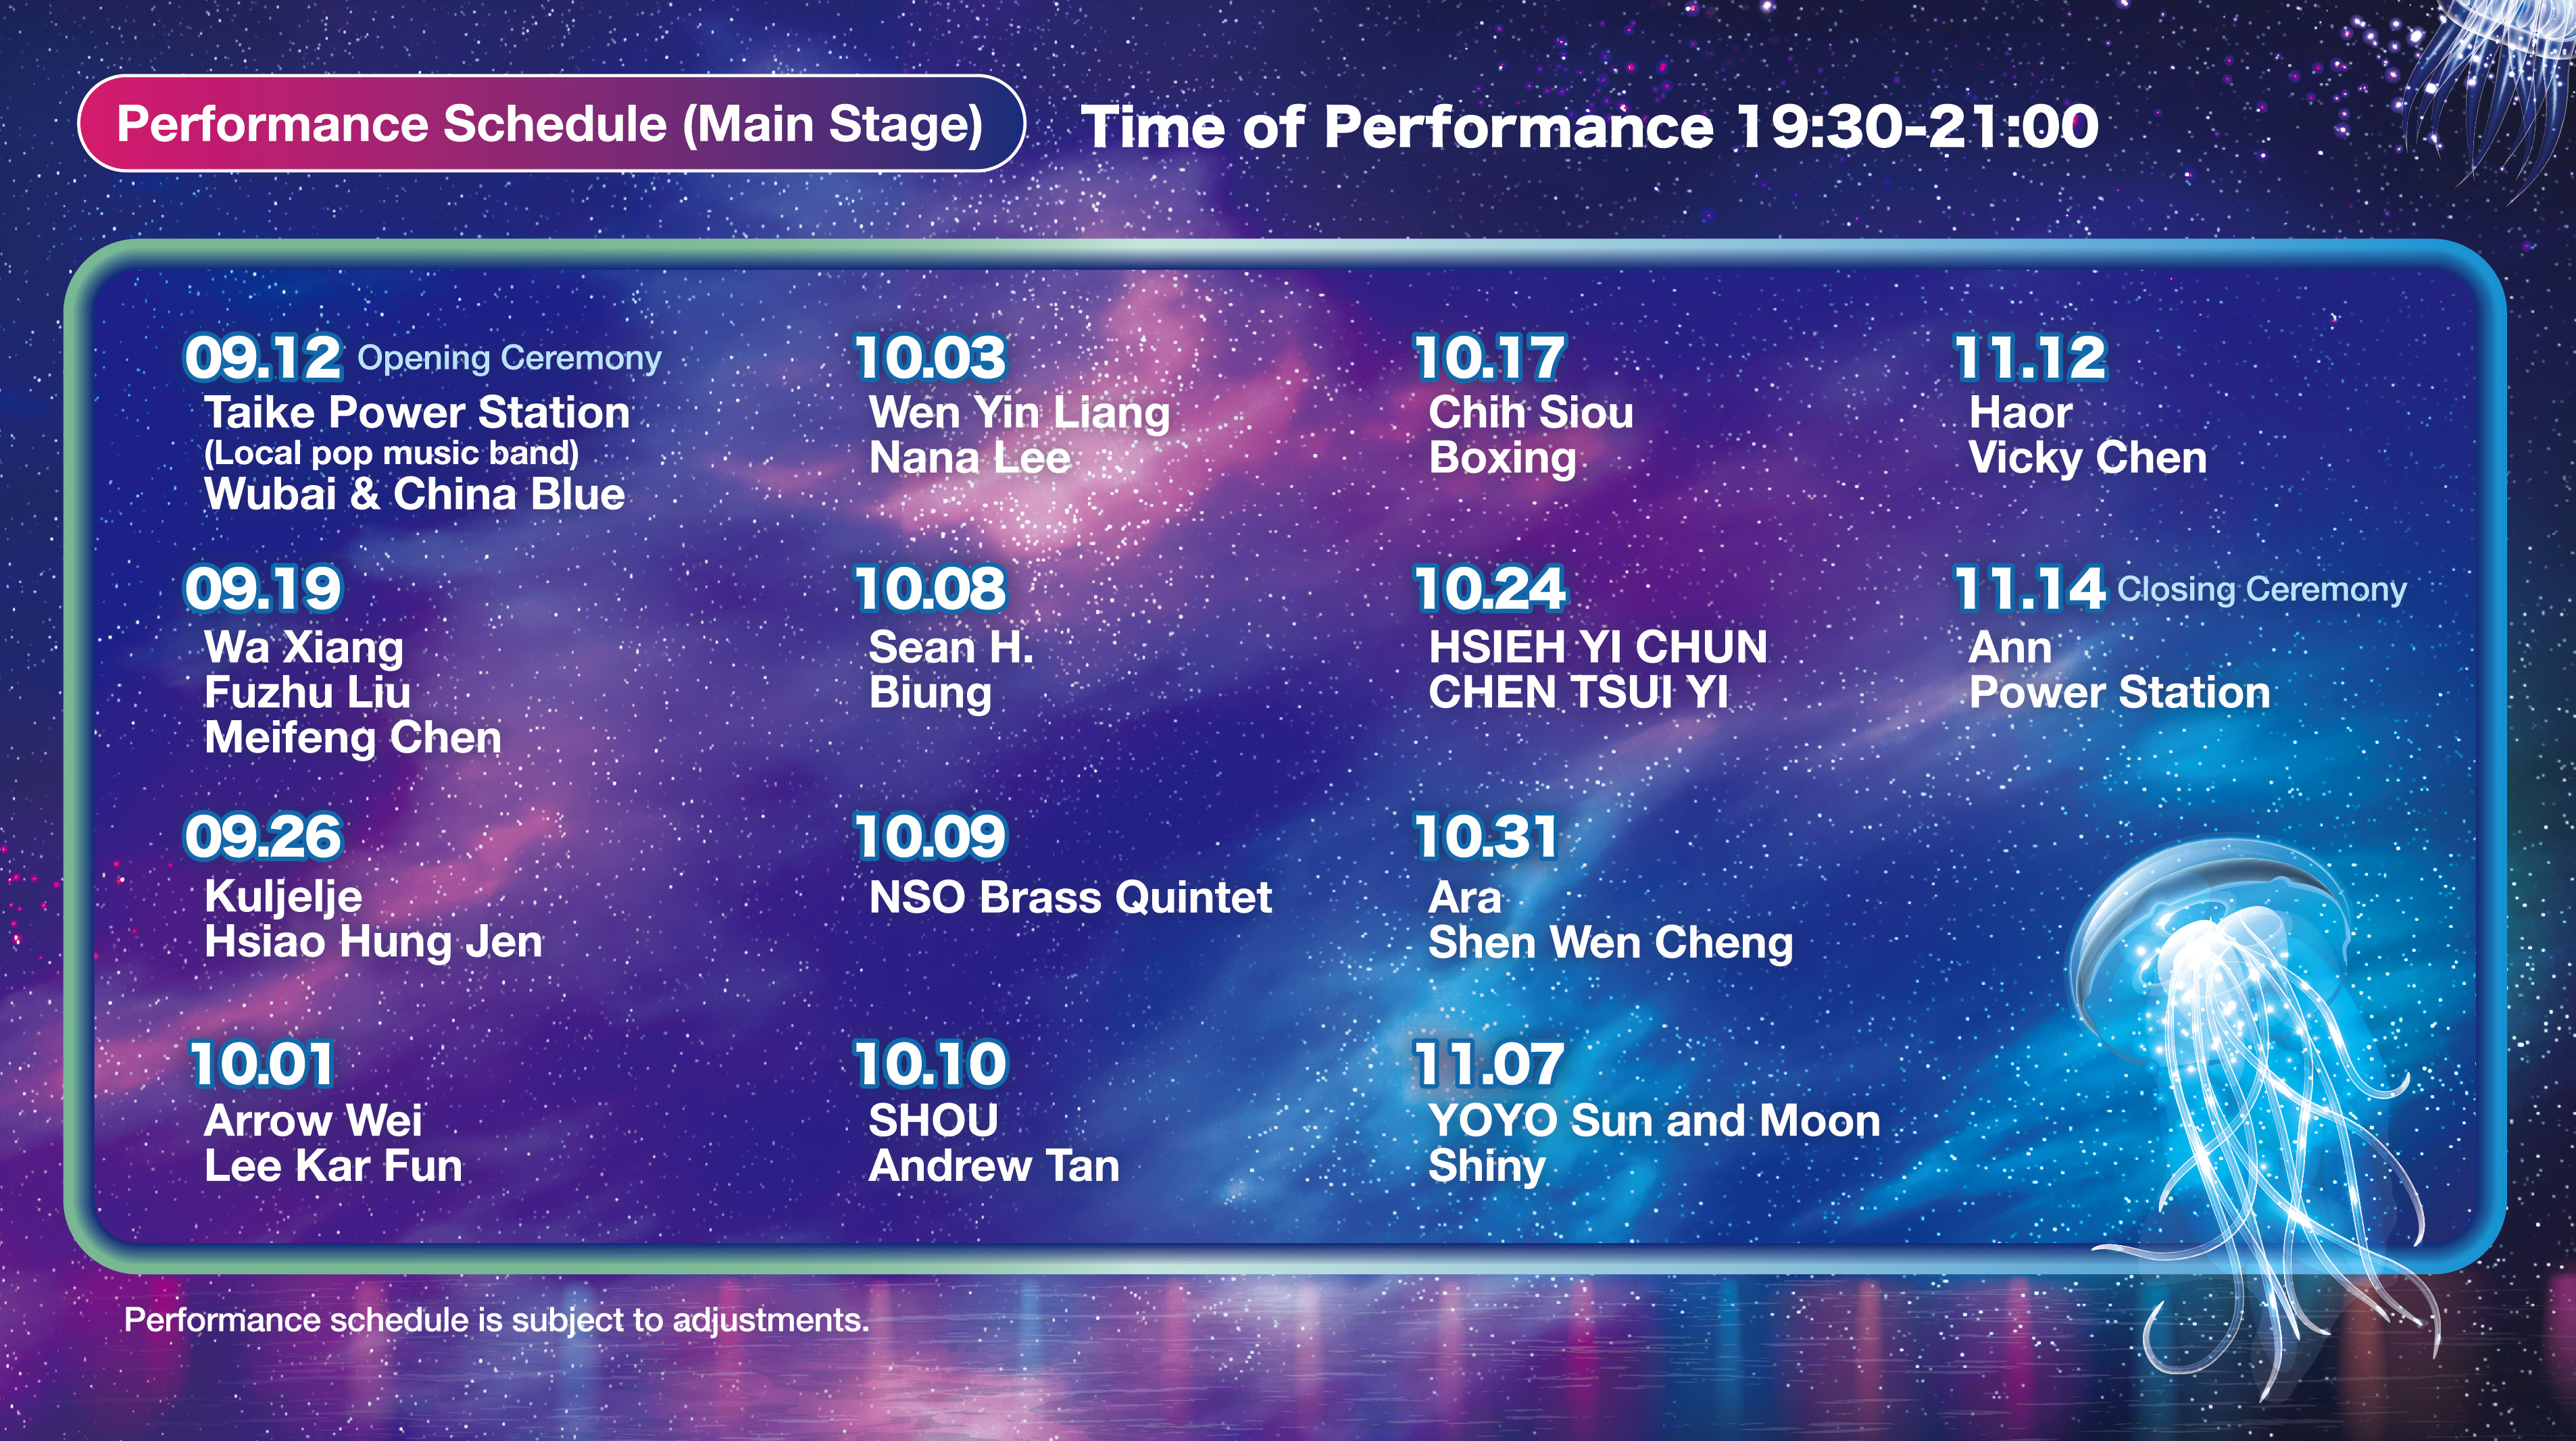 Performance Schedule (Main Stage)